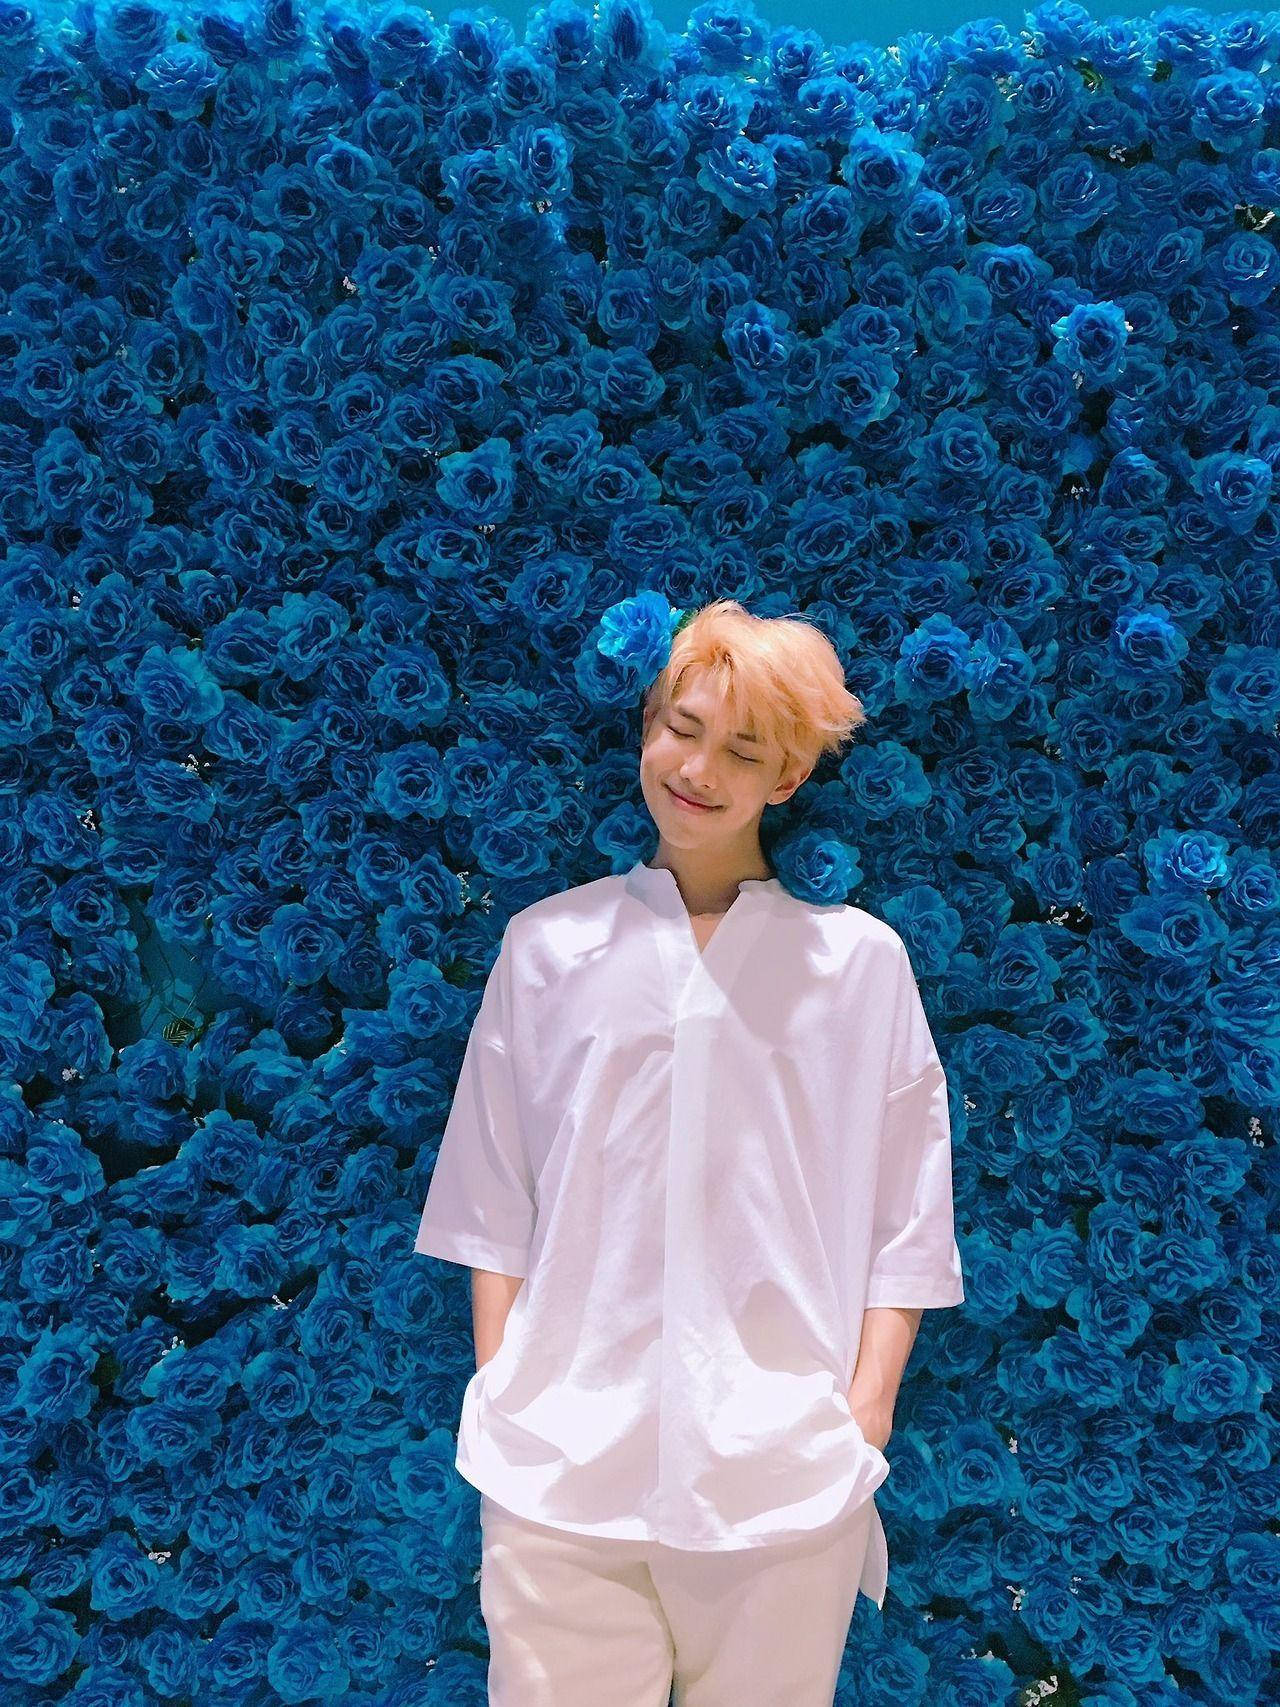 Namjoon Poses With Blue Roses